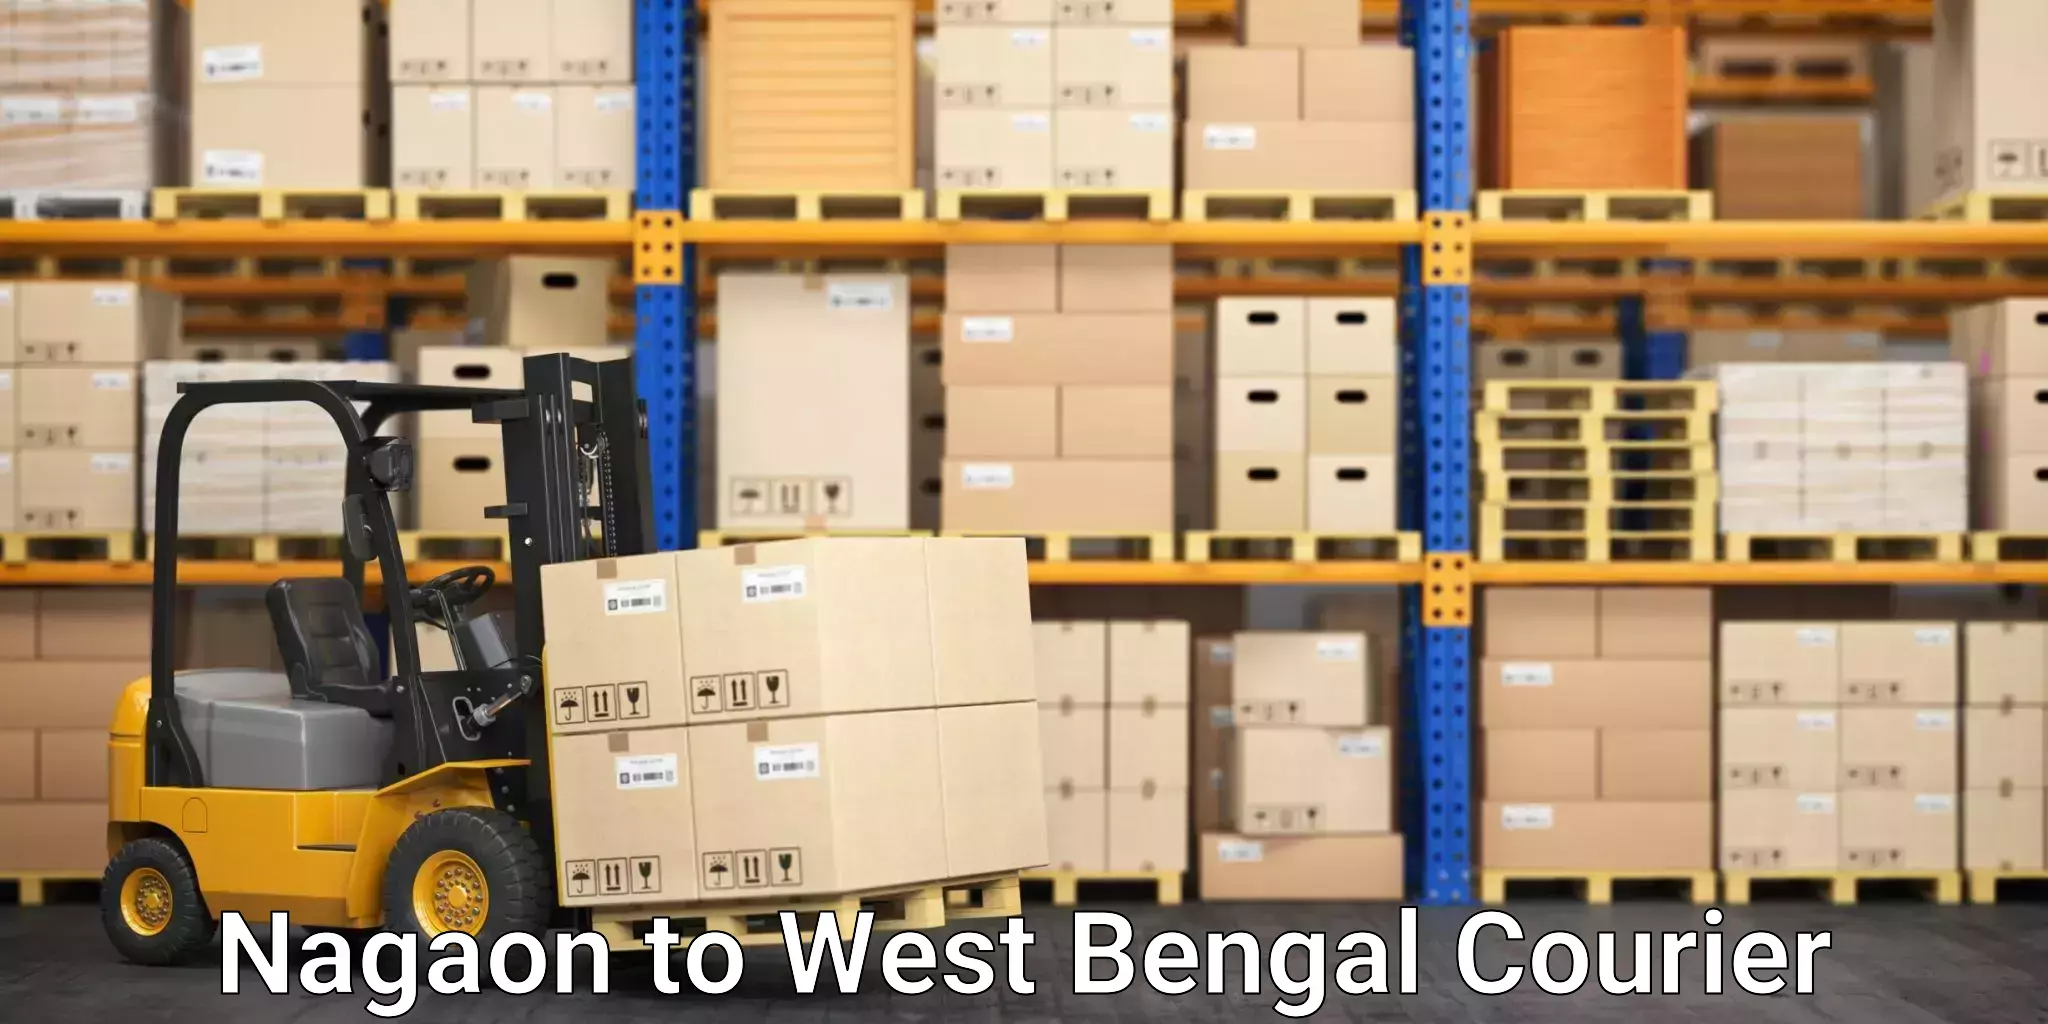 Smart courier technologies Nagaon to West Bengal